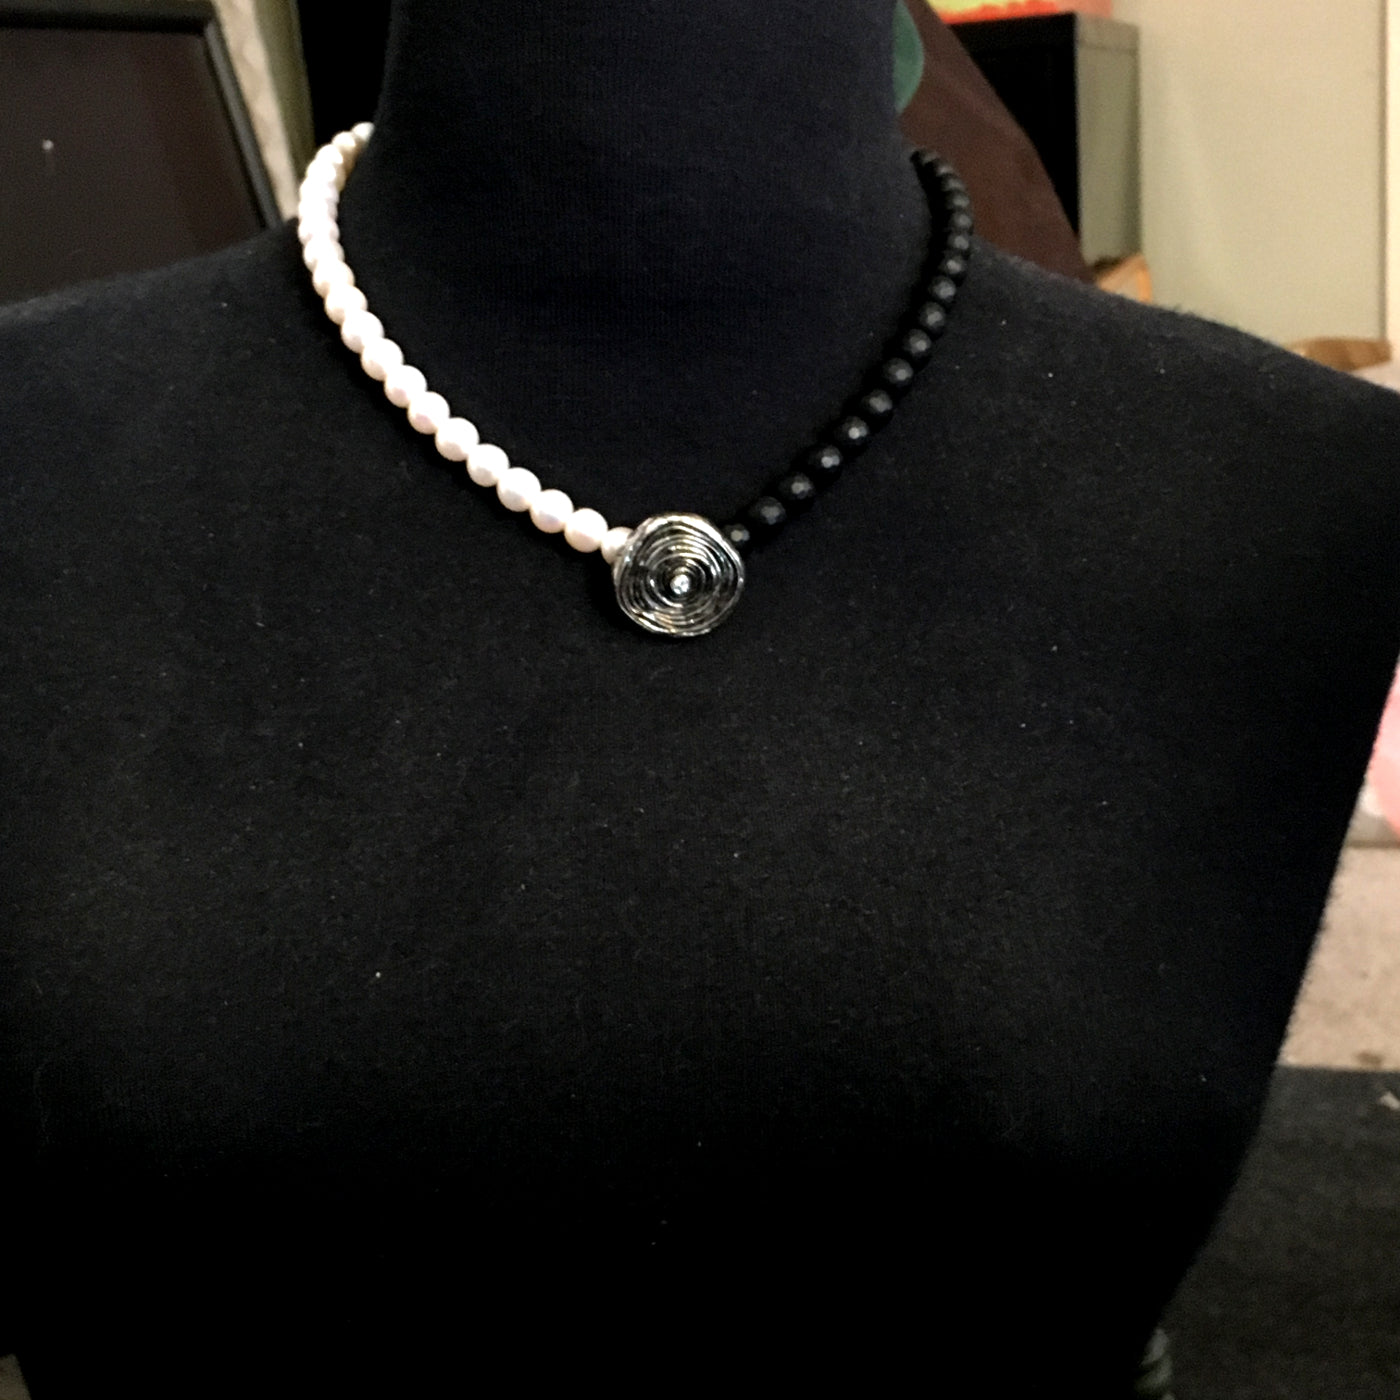 Onyx, Pearl and Diamond Statement Necklace - Asymmetrical Necklace with Mitsuro Hikime